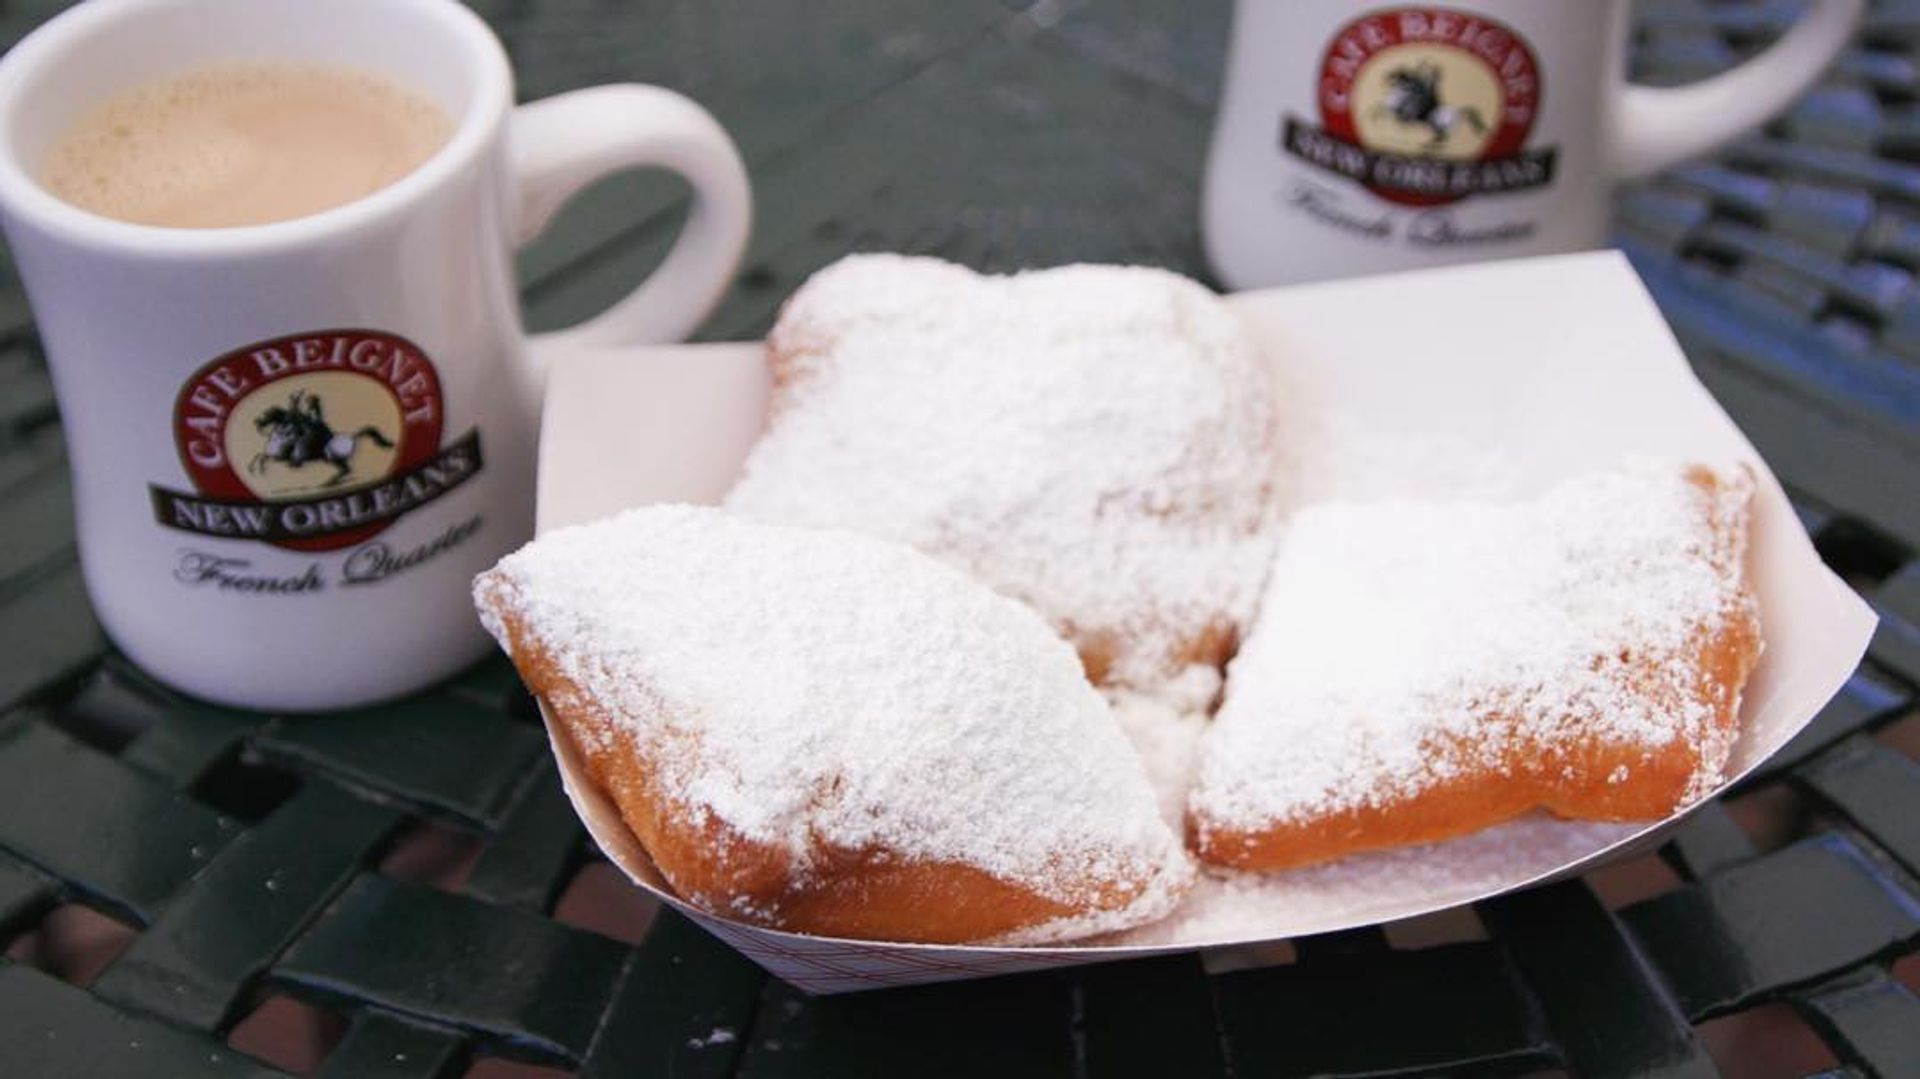 Beignets & Bubbly on Bourbon Street: Bottomless Mimosas, Brunch Entrees & Live Jazz at Cafe Beignet image 11